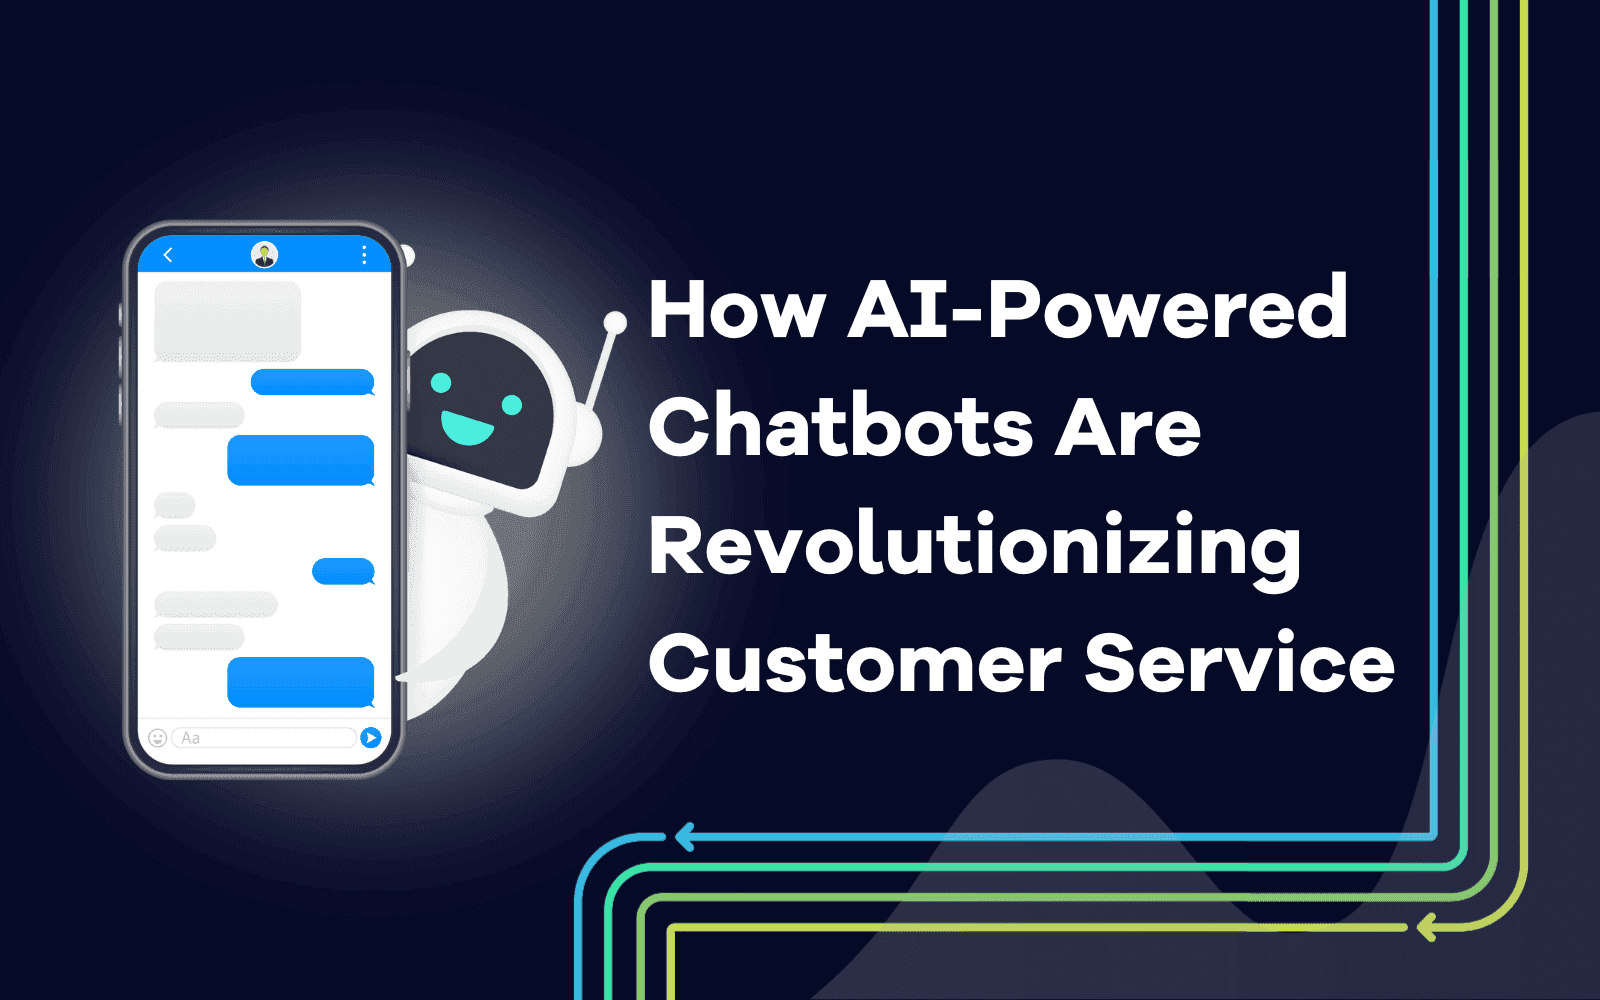 How AI-Powered Chatbots Are Revolutionizing Customer Service